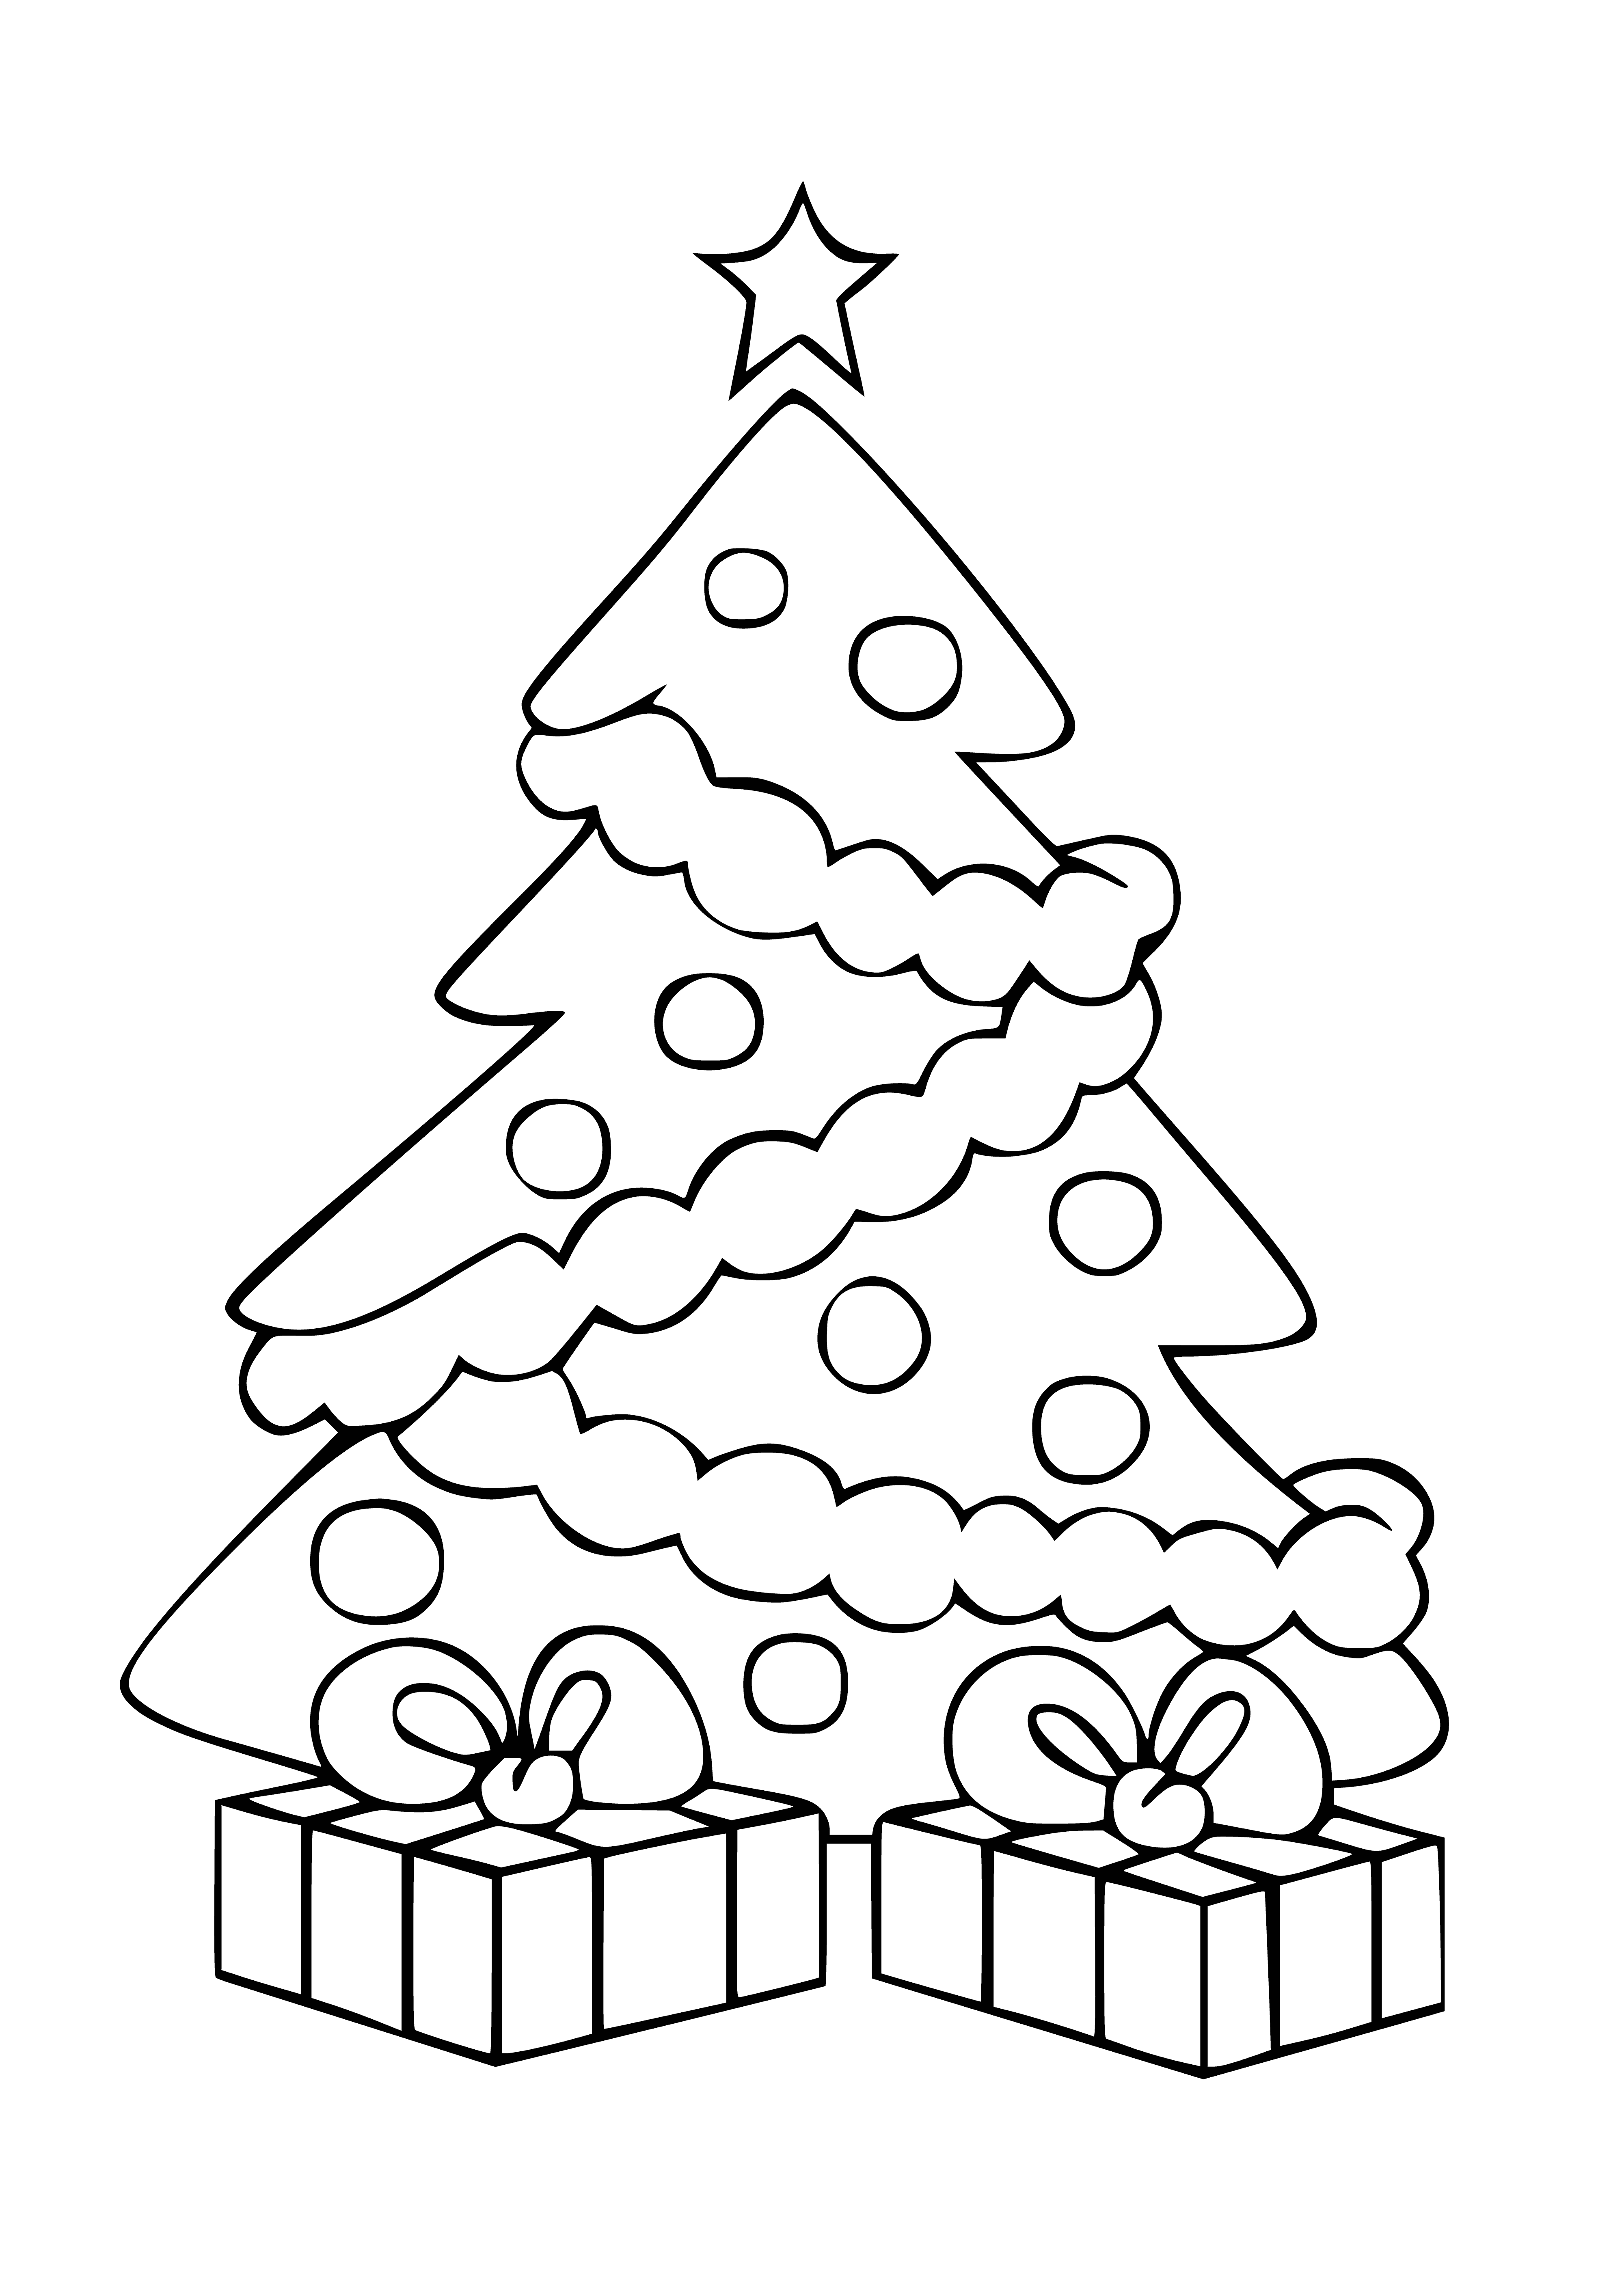 coloring page: A decorated tree, usually evergreen, associated with Christmas, present since medieval times & gaining popularity in the 19th century.